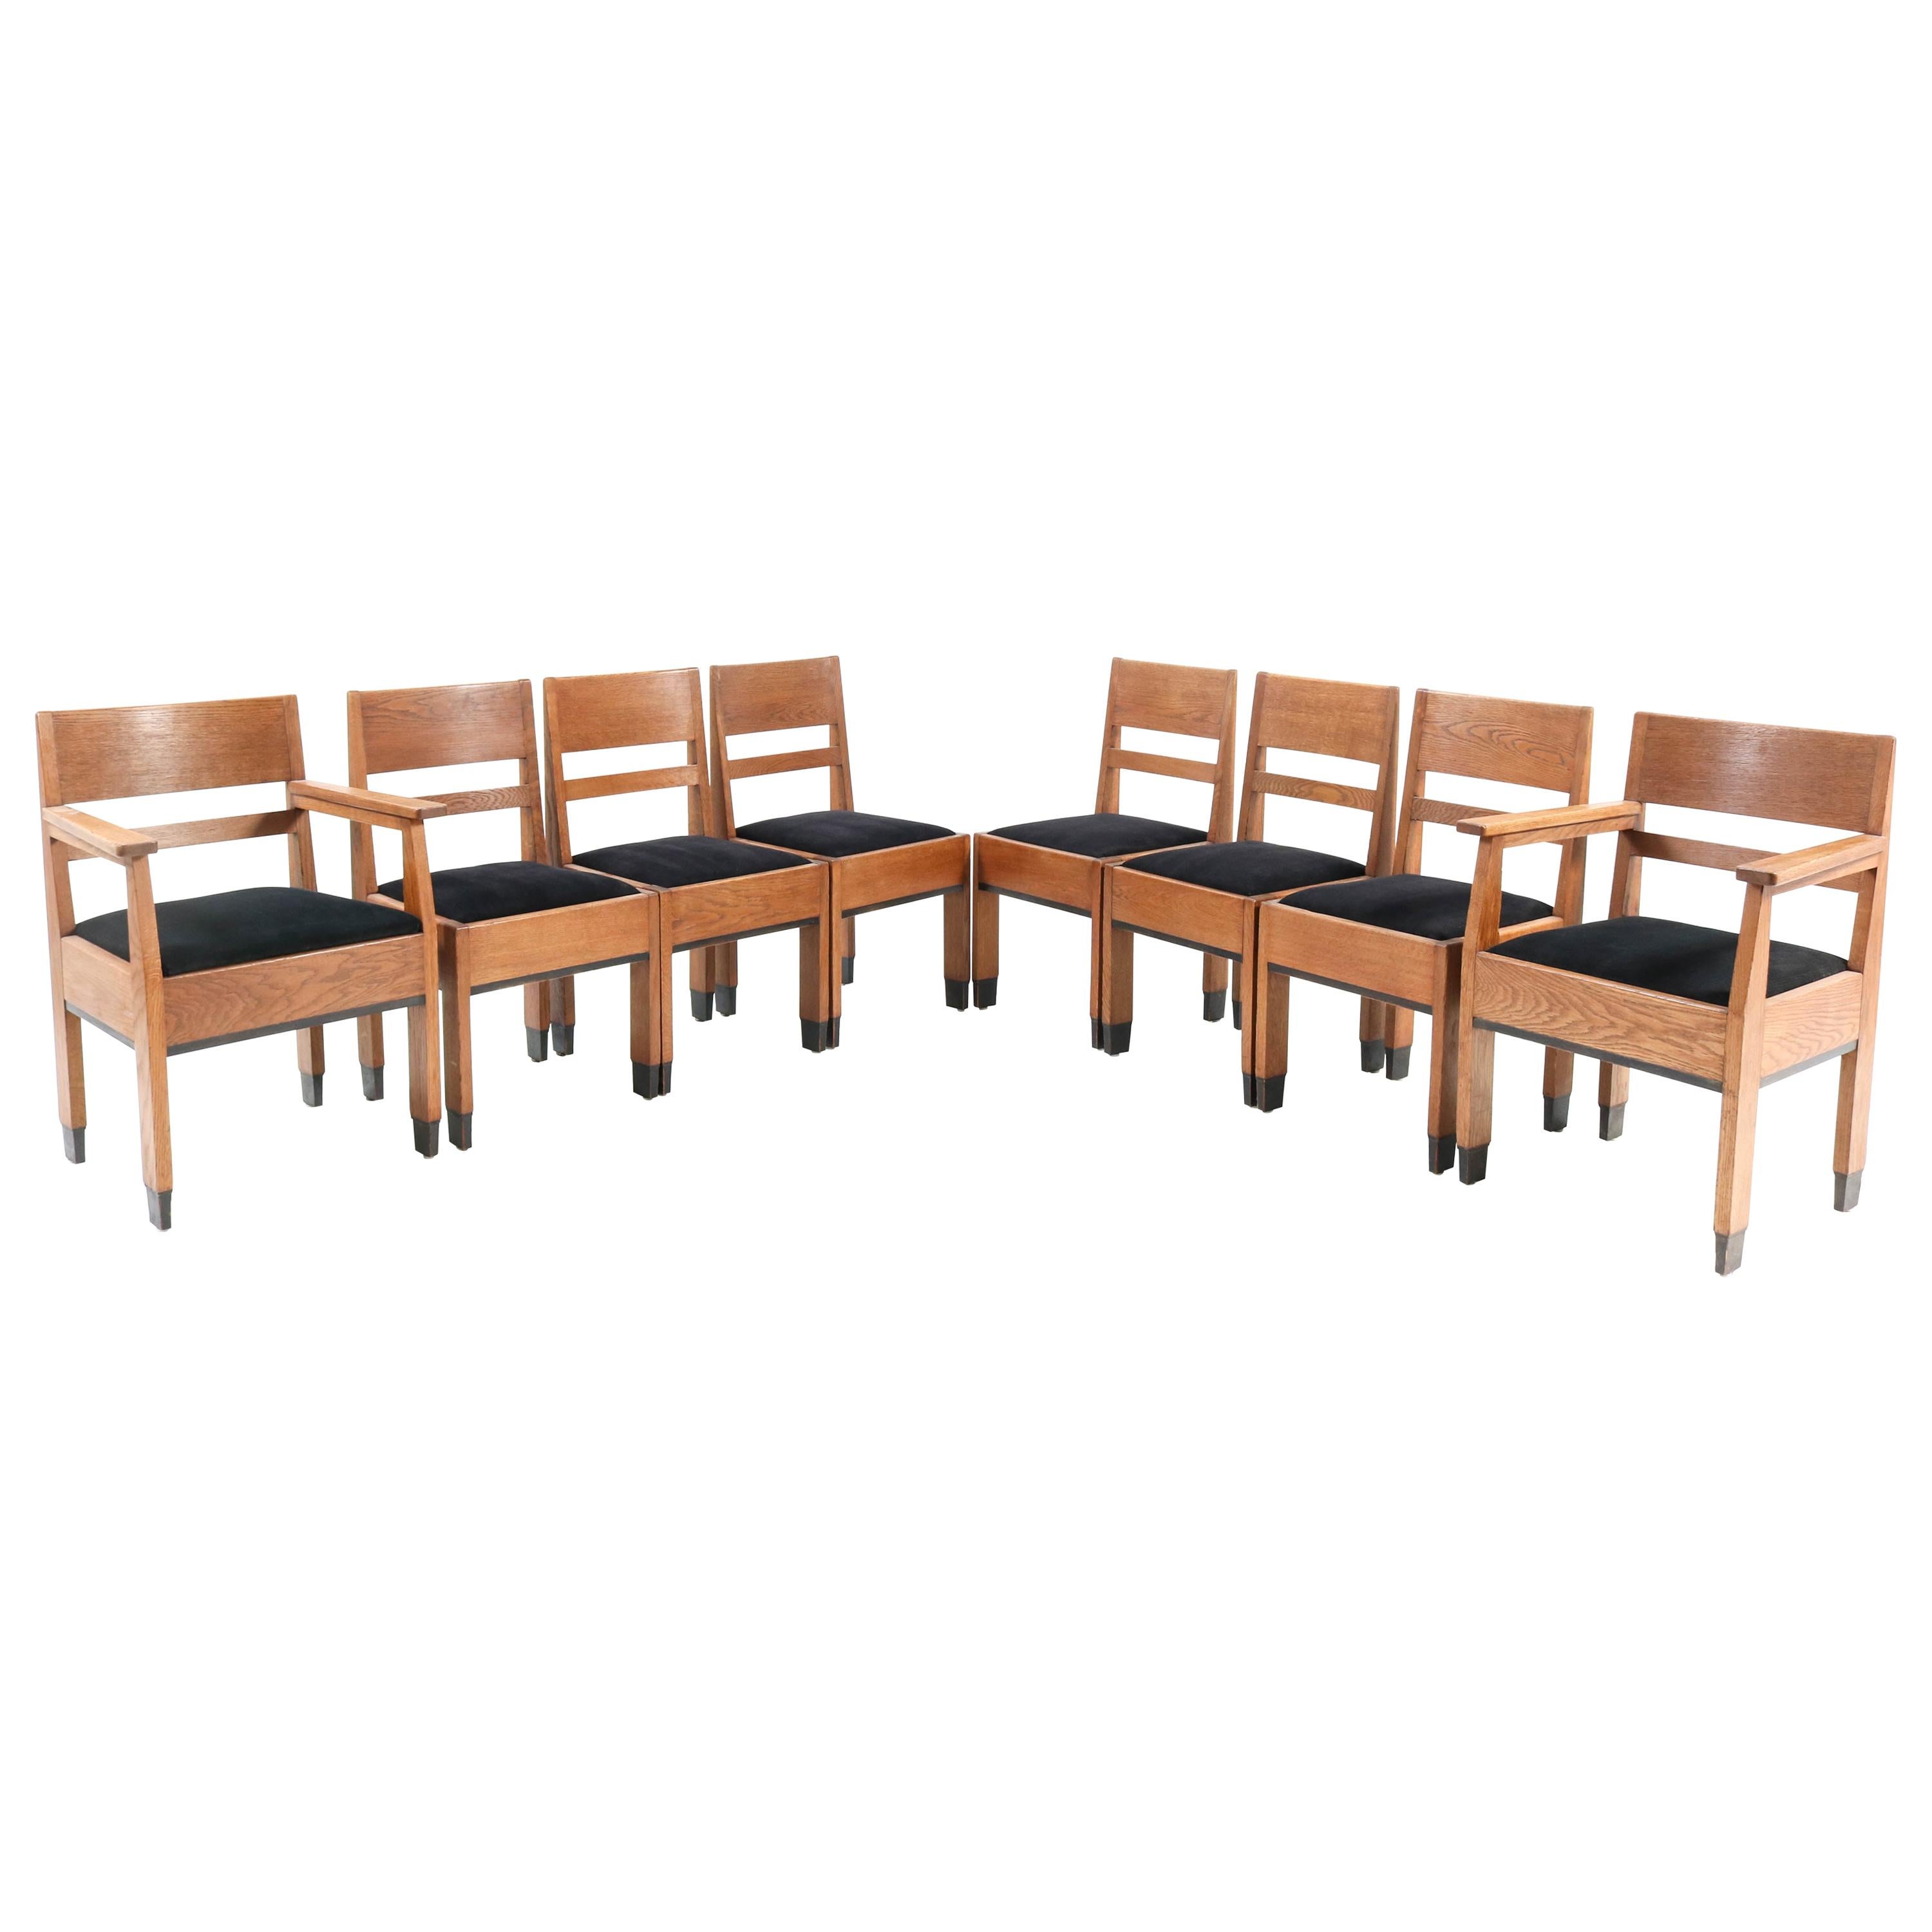 Eight Oak Art Deco Haagse School Chairs by H. Fels for L.O.V. Oosterbeek, 1924